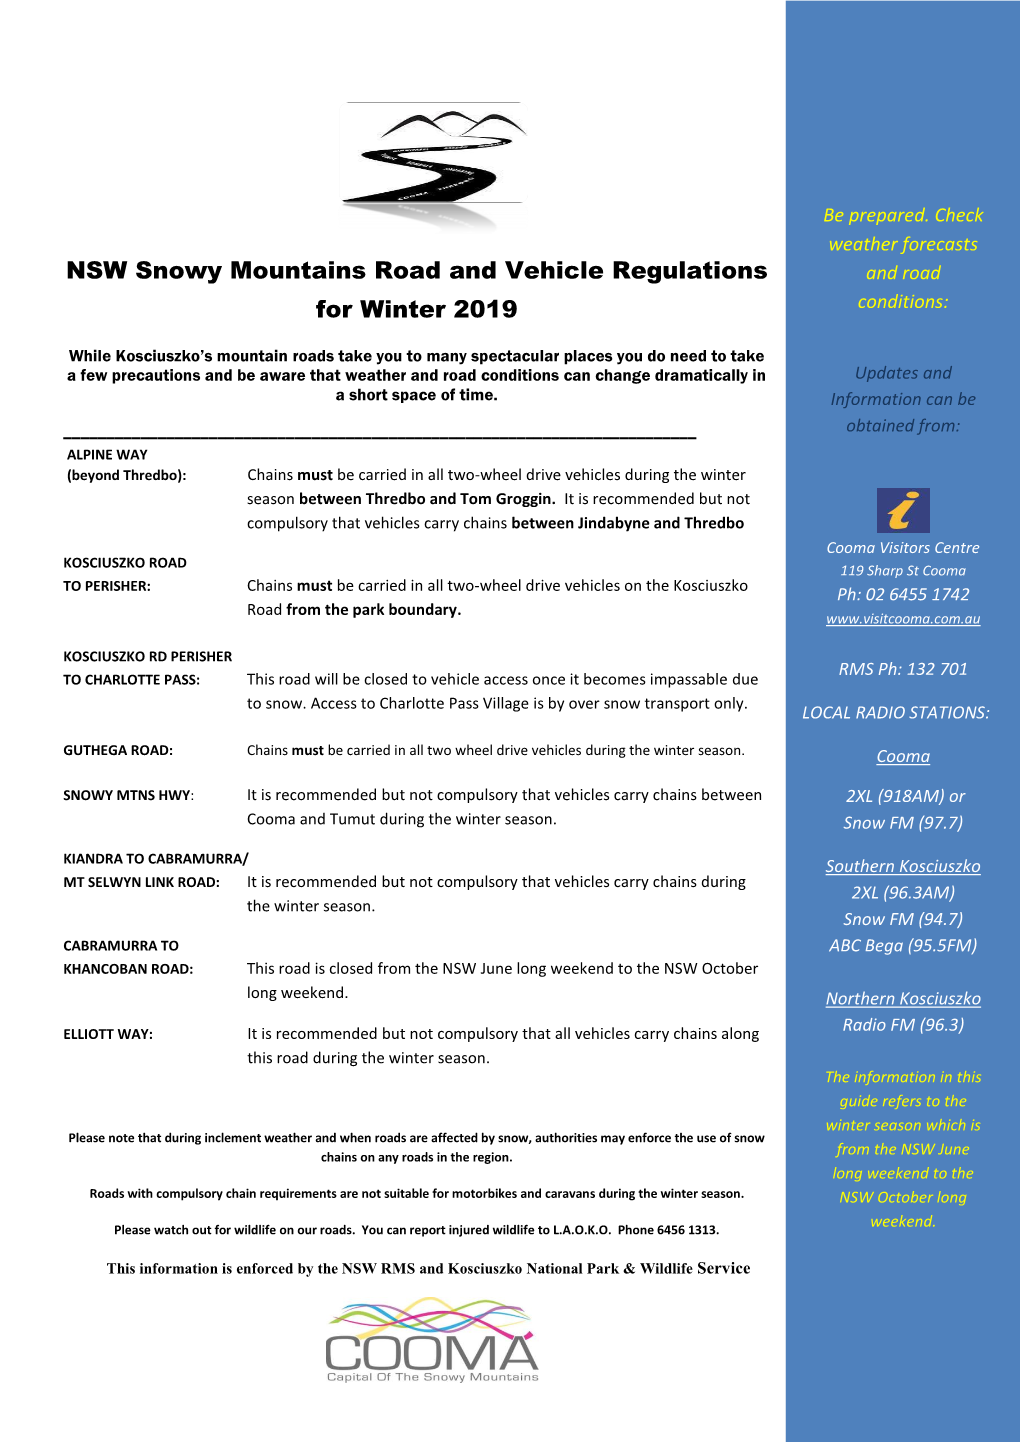 NSW Snowy Mountains Road and Vehicle Regulations for Winter 2019